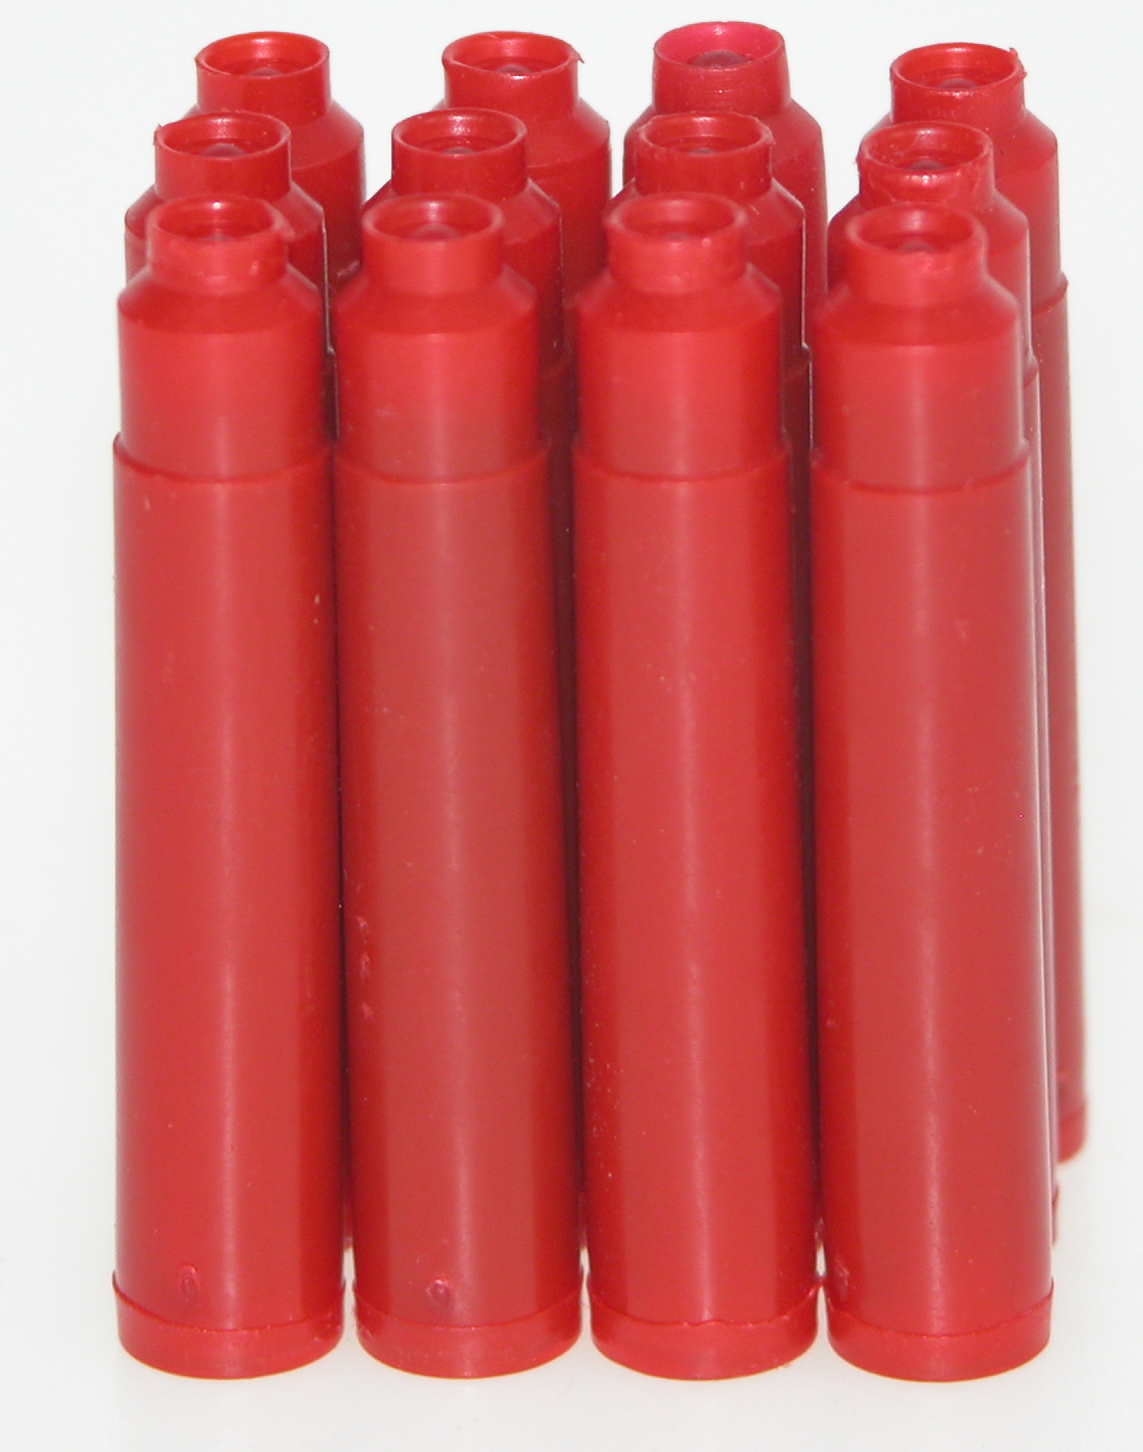 You are bidding on a package of 40 High Quality RED ink